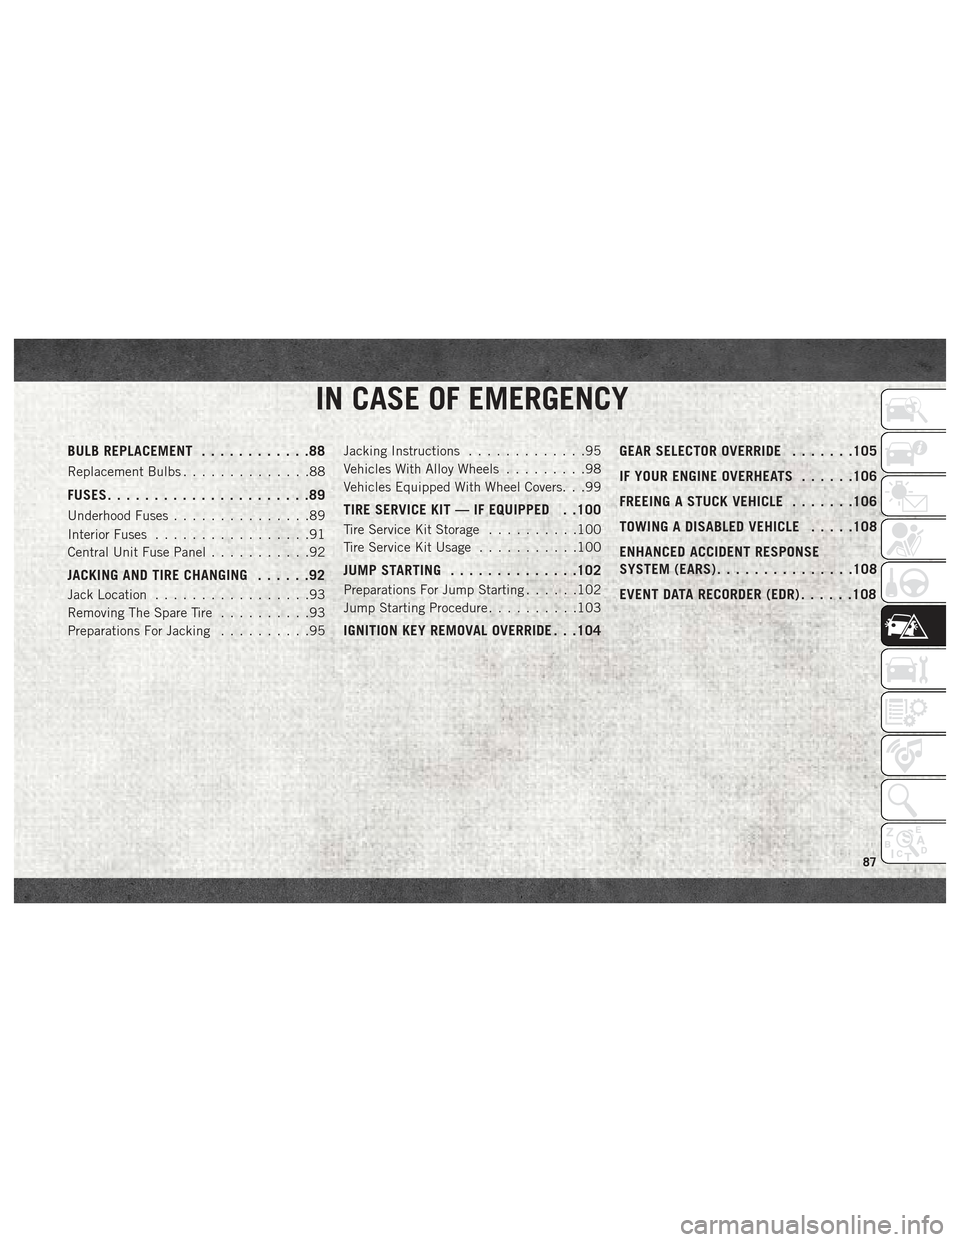 Ram ProMaster City 2018  User Guide IN CASE OF EMERGENCY
BULB REPLACEMENT............88
Replacement Bulbs..............88
FUSES......................89
Underhood Fuses ...............89
Interior Fuses .................91
Central Unit Fu